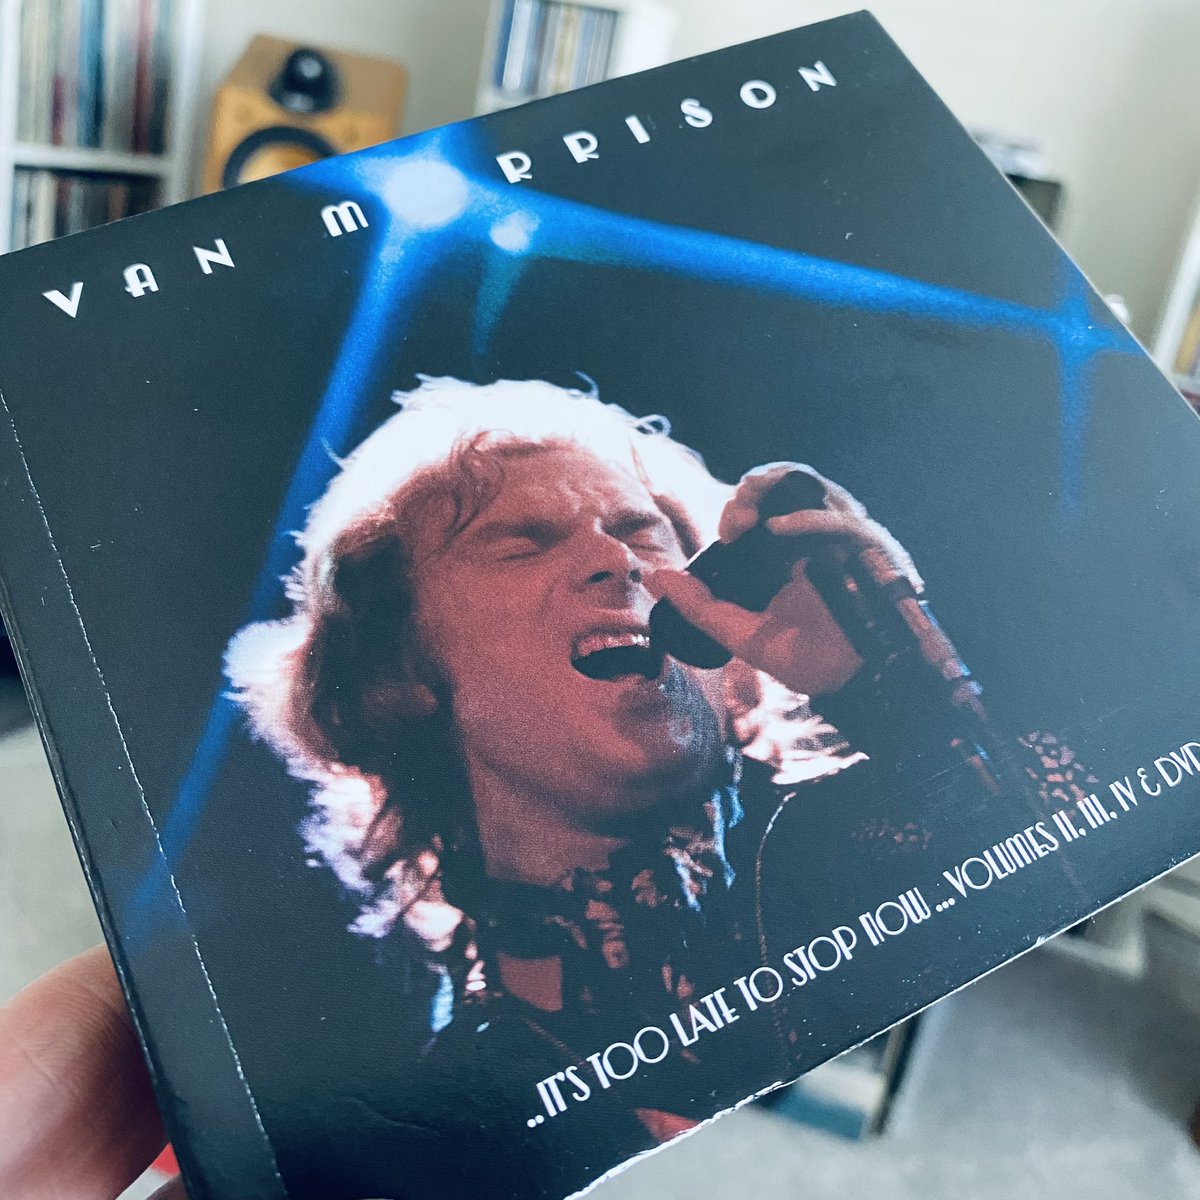 Listening to Van Morrison “It’s Too Late To Stop Now” Volumes II,III & IV May watch the DVD this evening